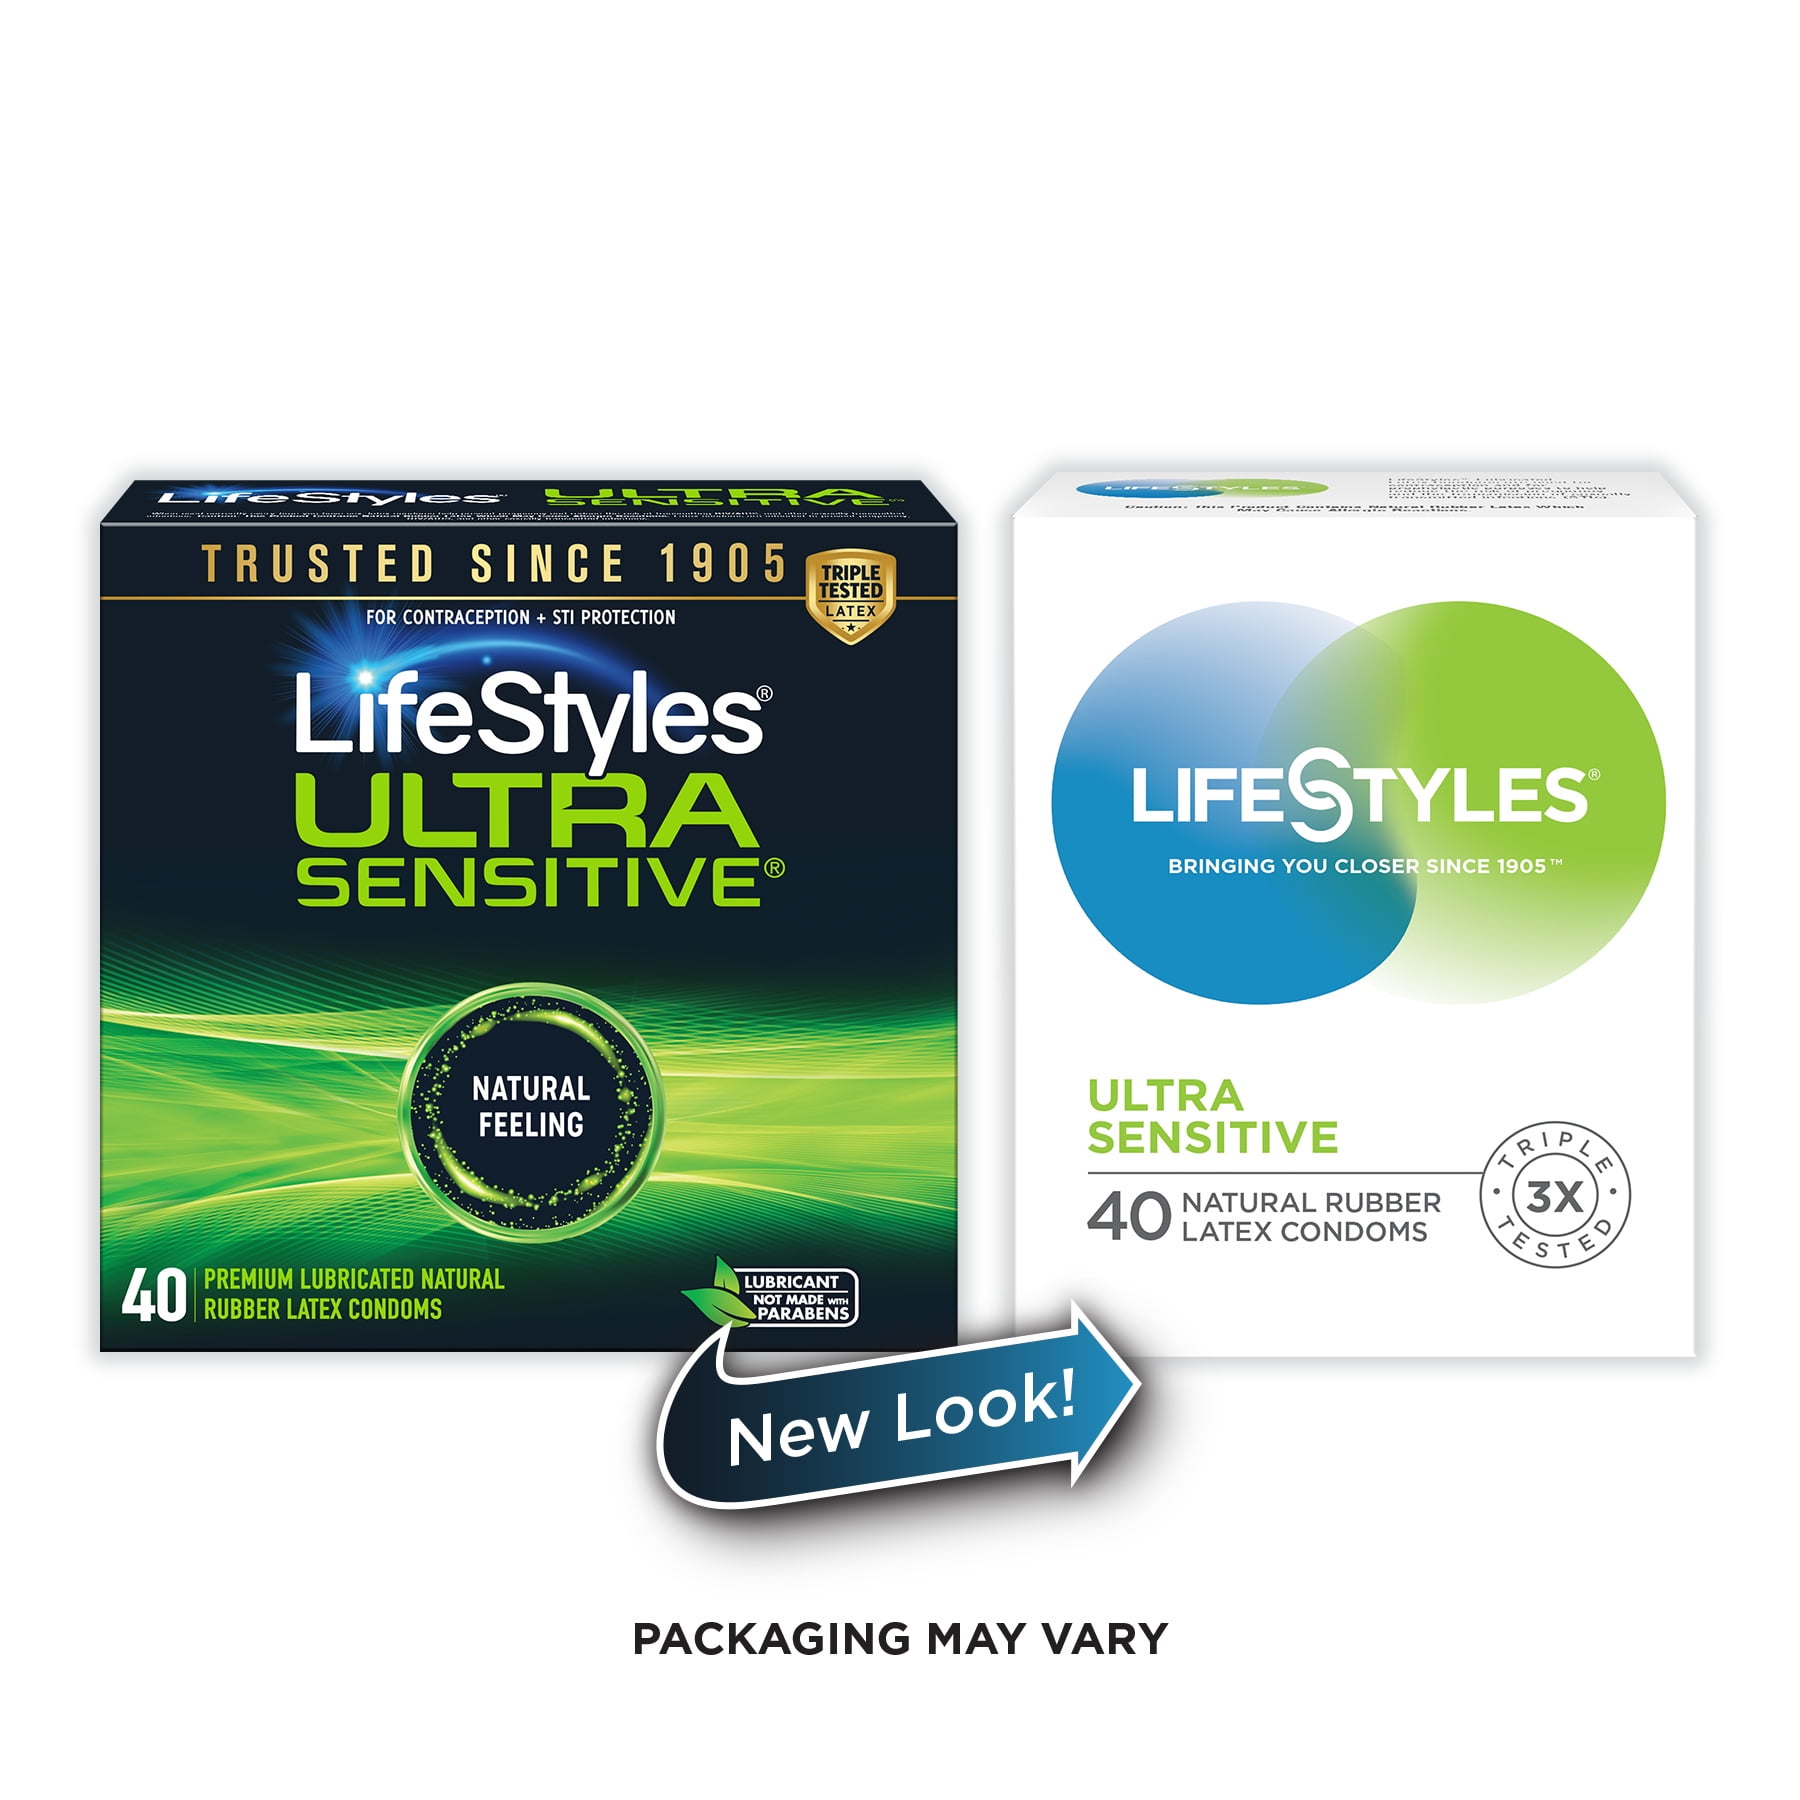 LifeStyles Ultra-Sensitive Lubricated Latex Condoms, 40 Count photo